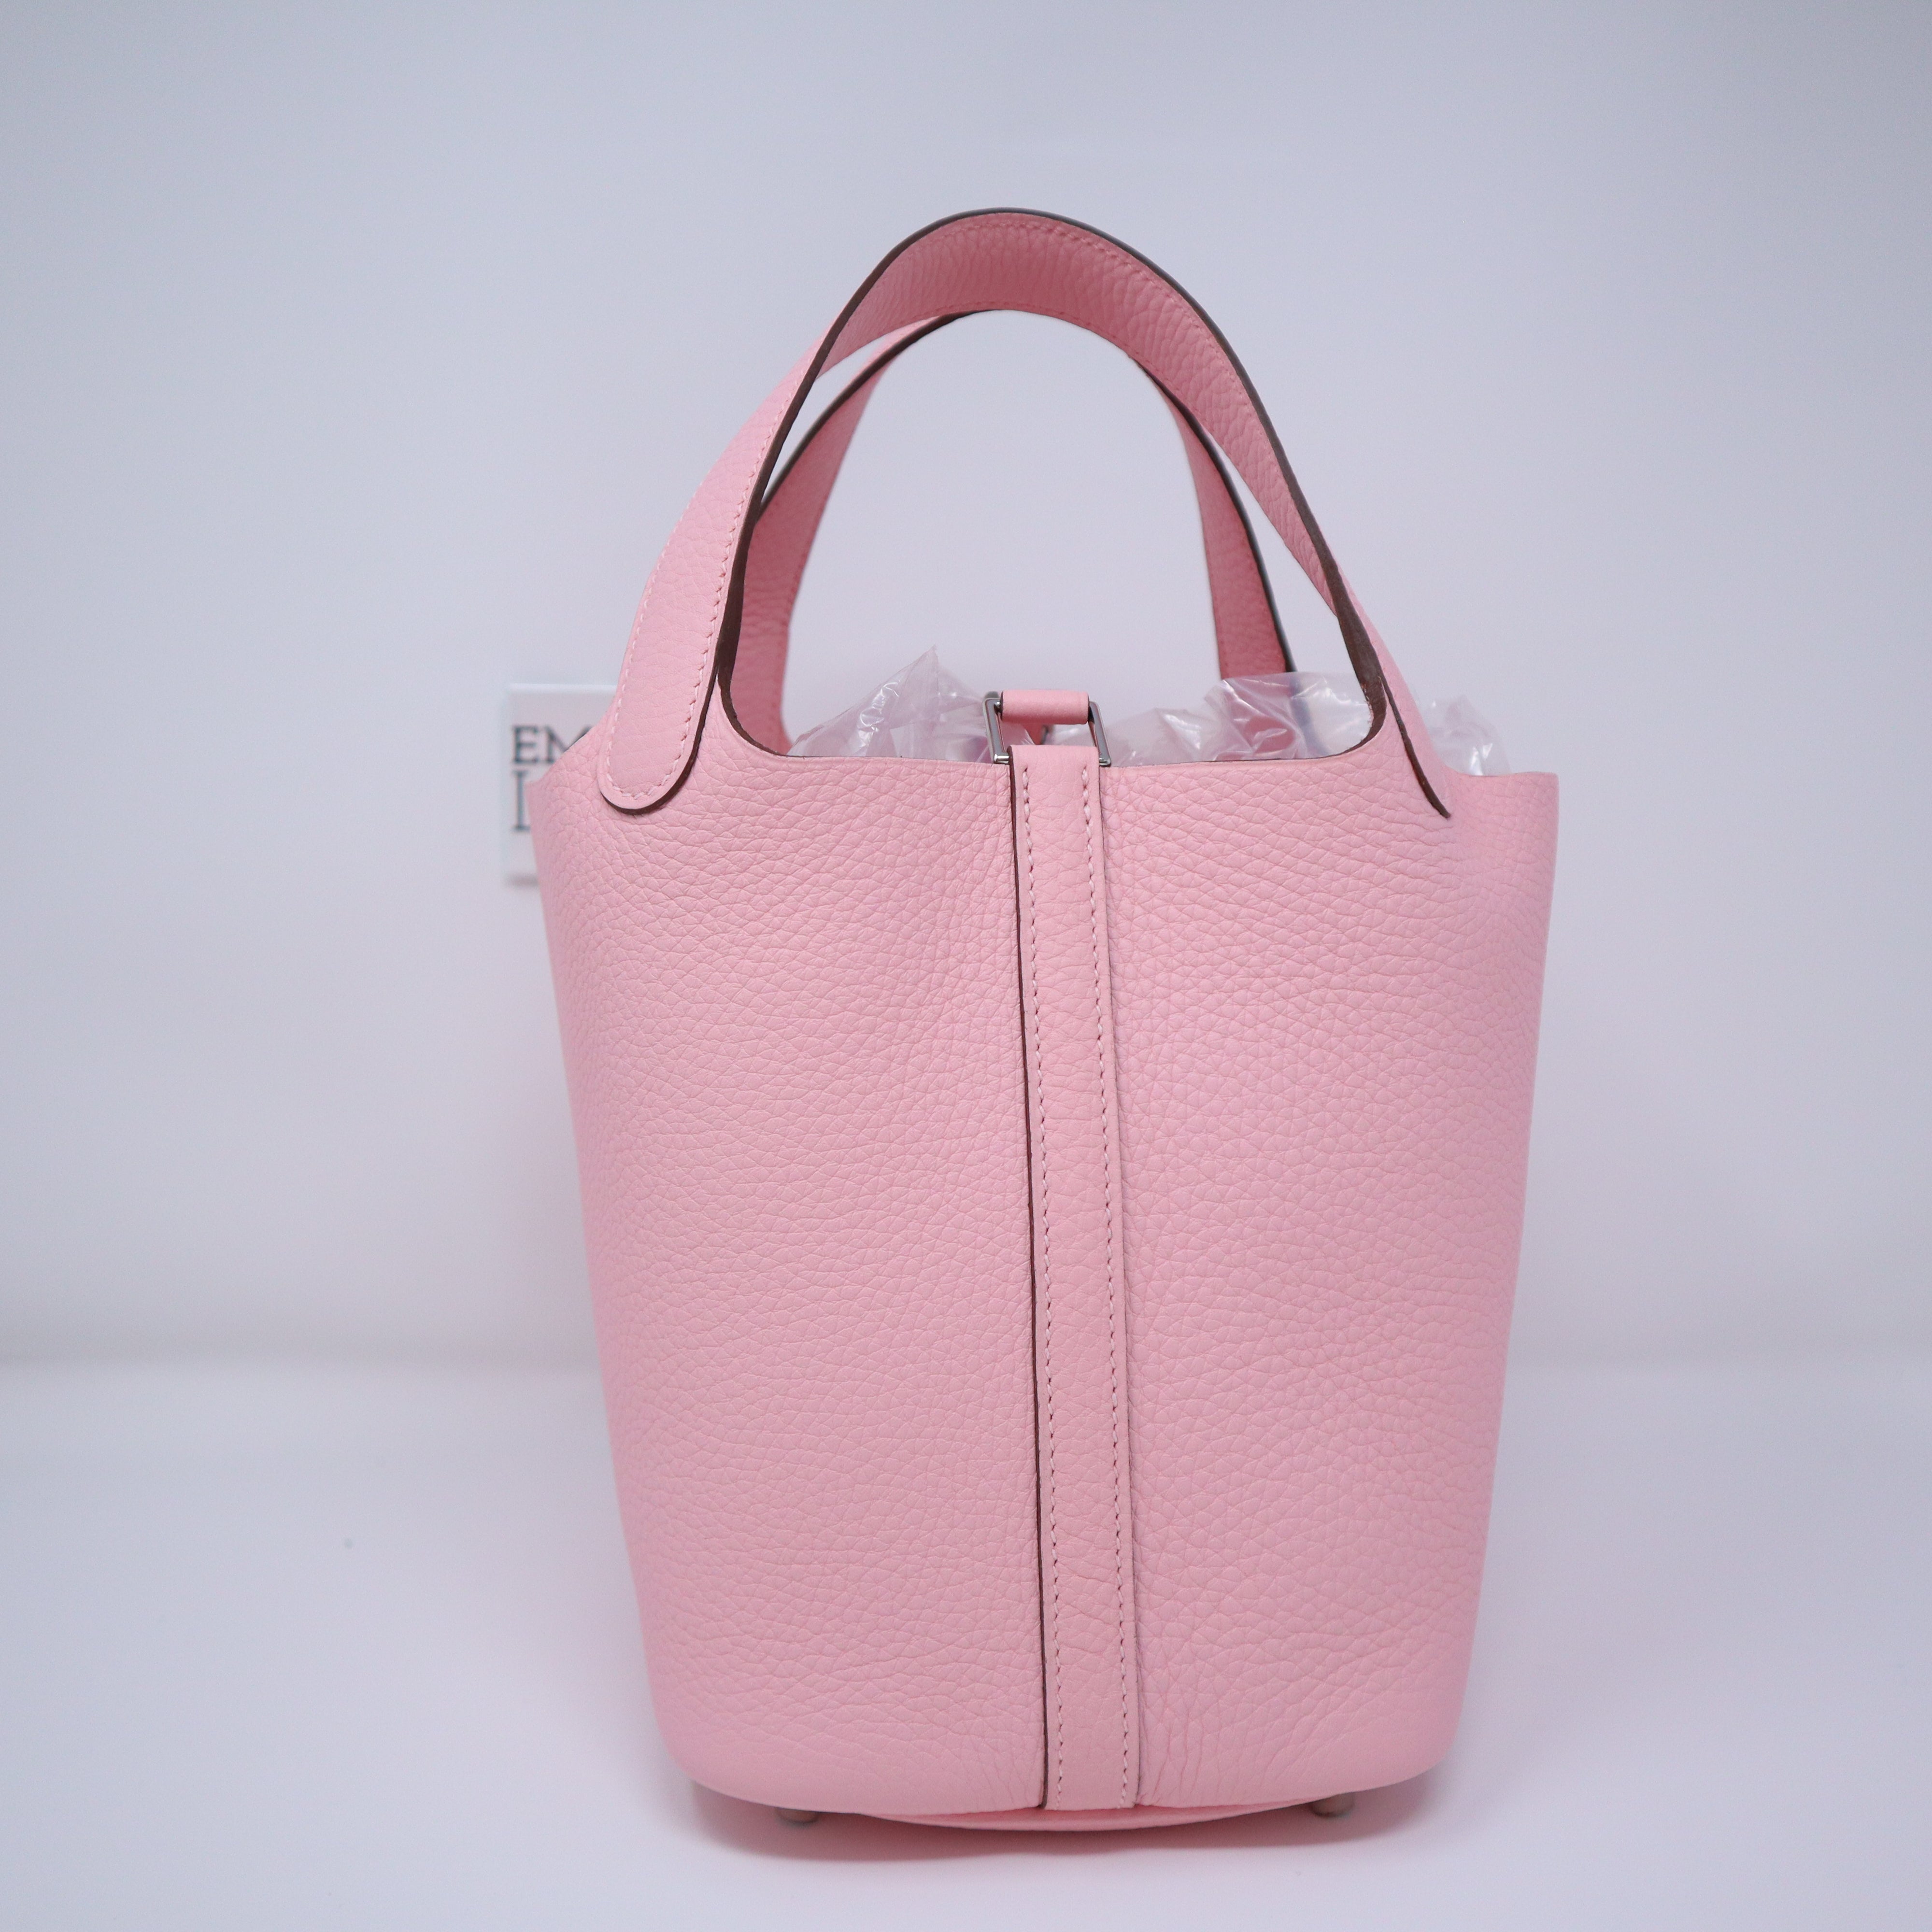 HERMES NEW Picotin 18 Pink Leather Palladium Small Top Handle Tote